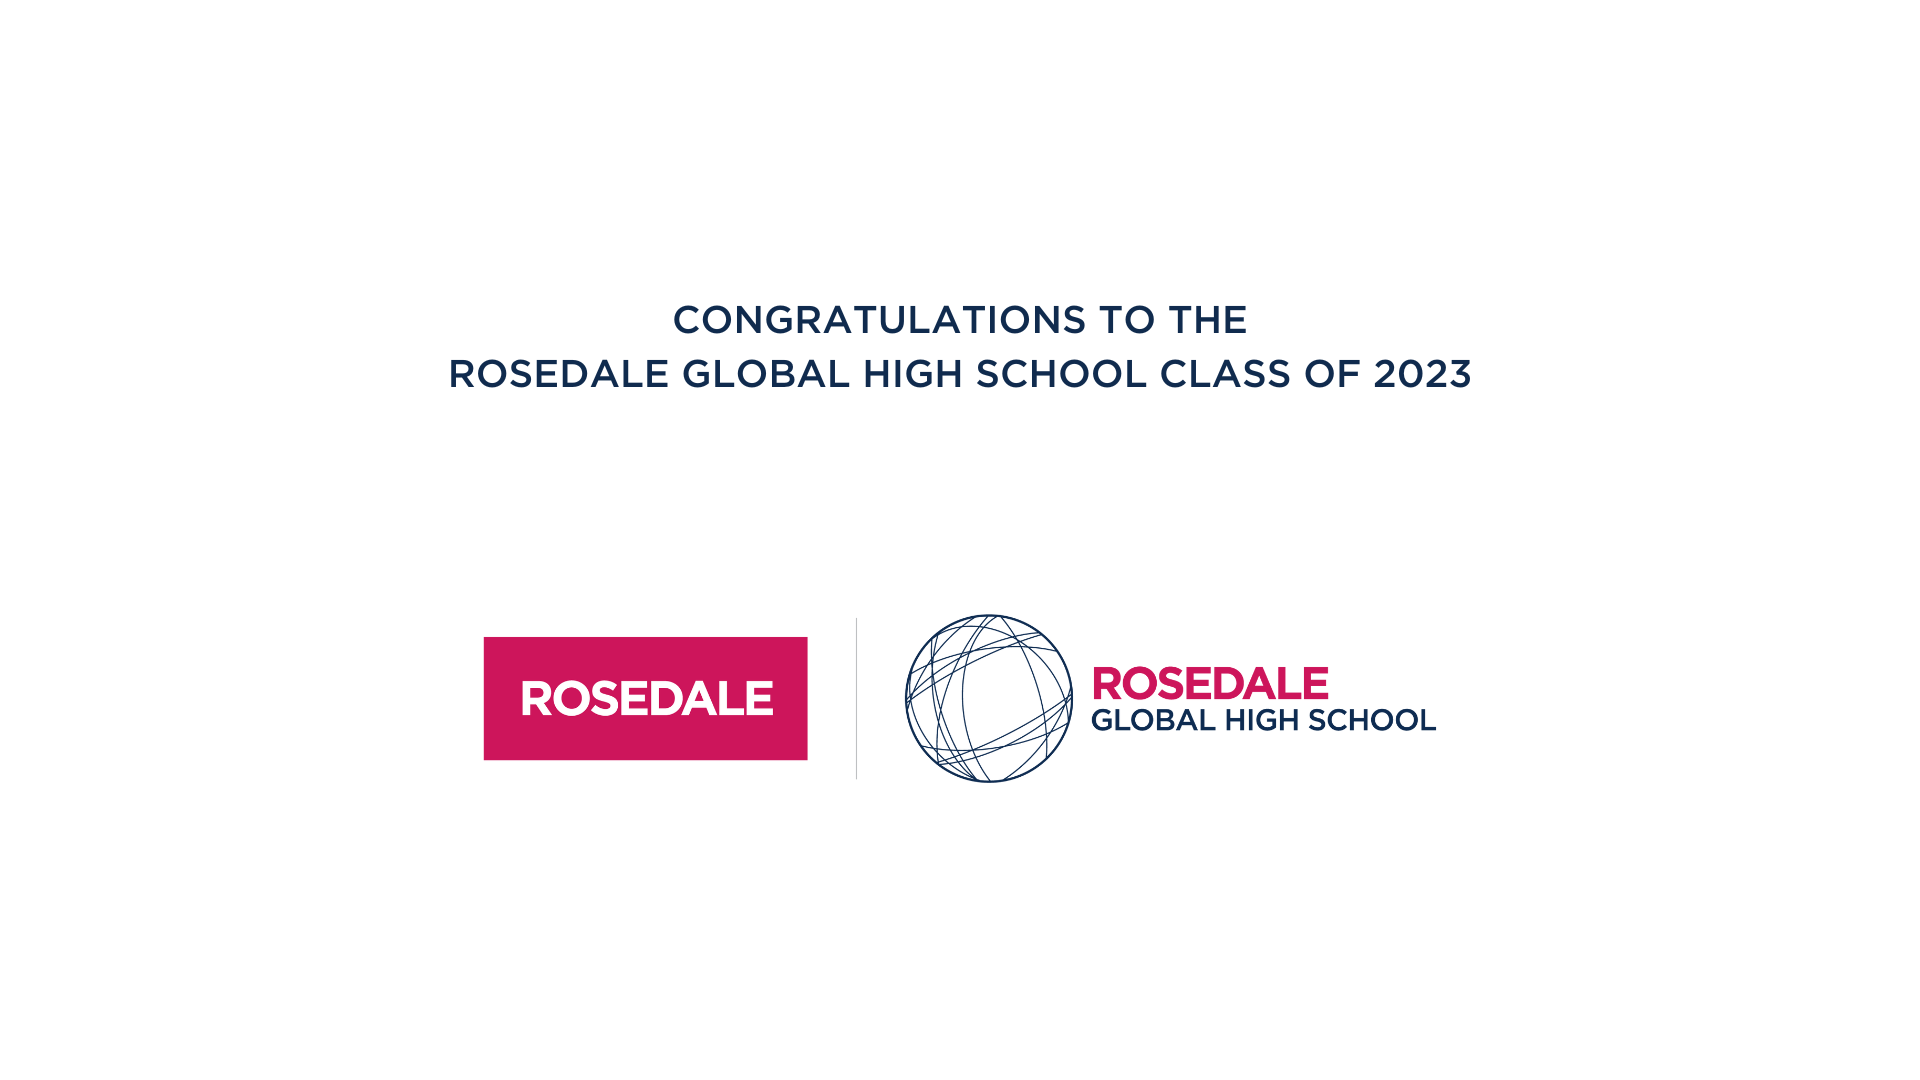 Congratulations to the Rosedale Global High School Class of 2023